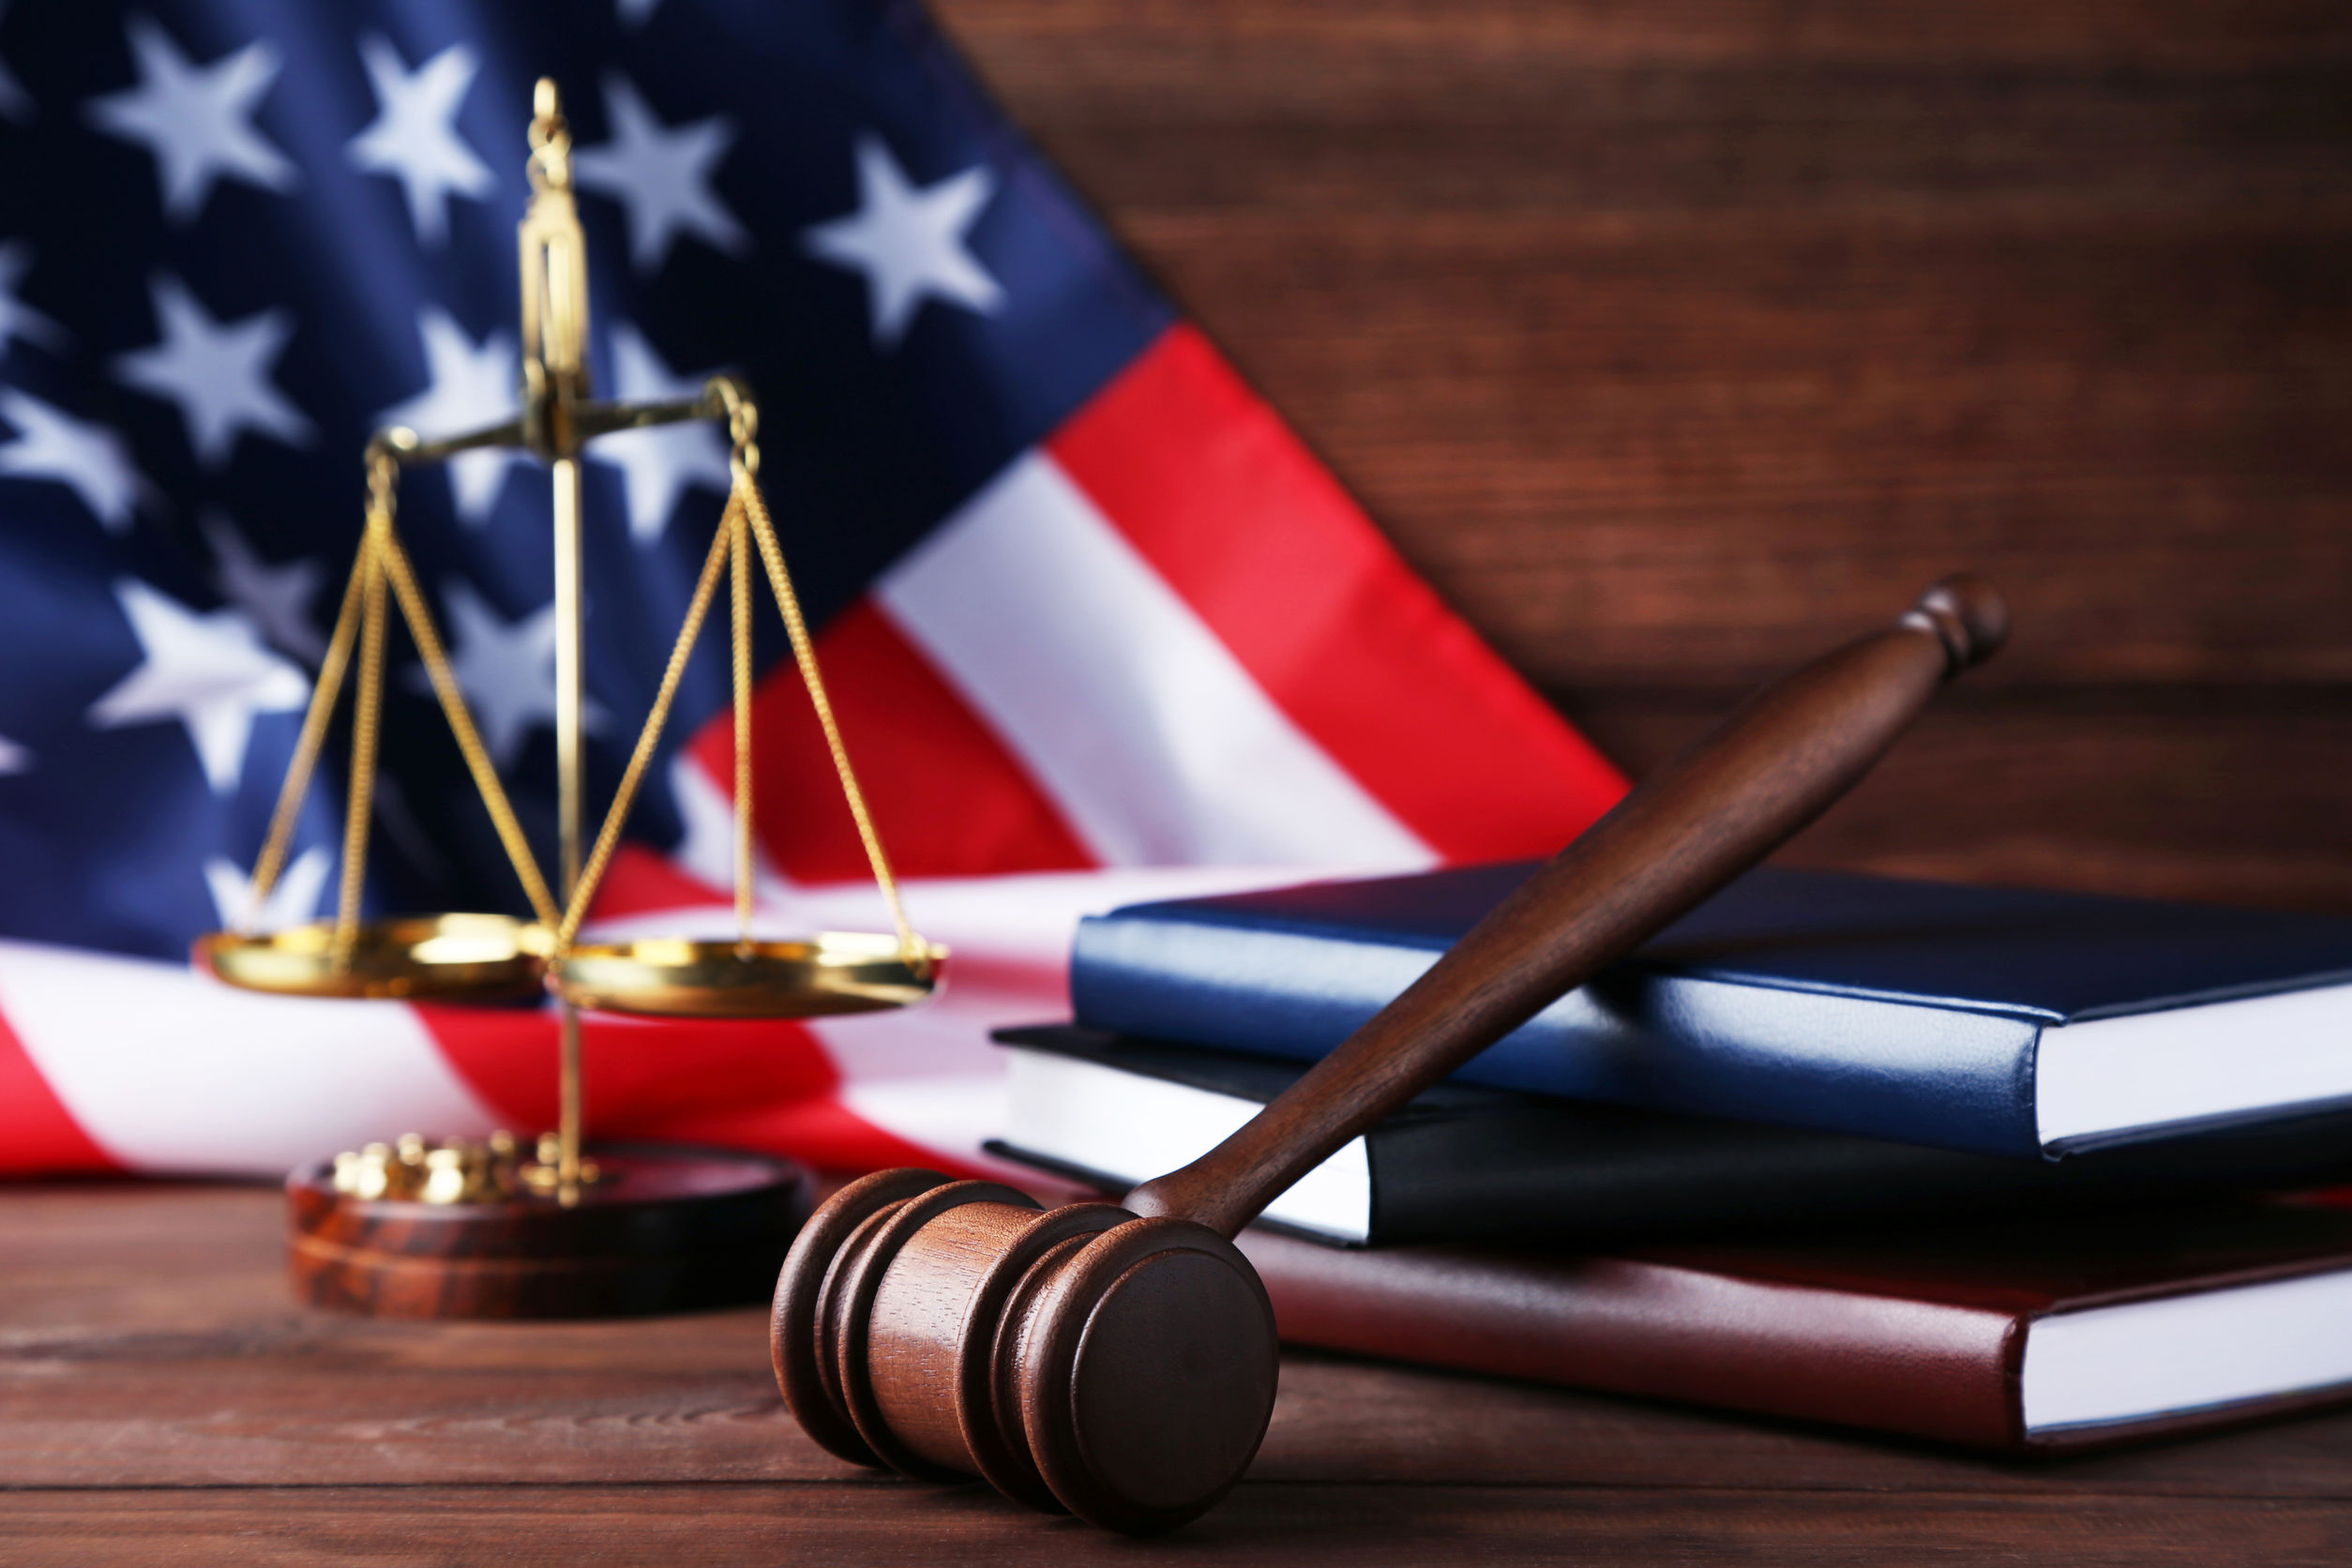 Judge gavel with scales, books and american flag on wooden table